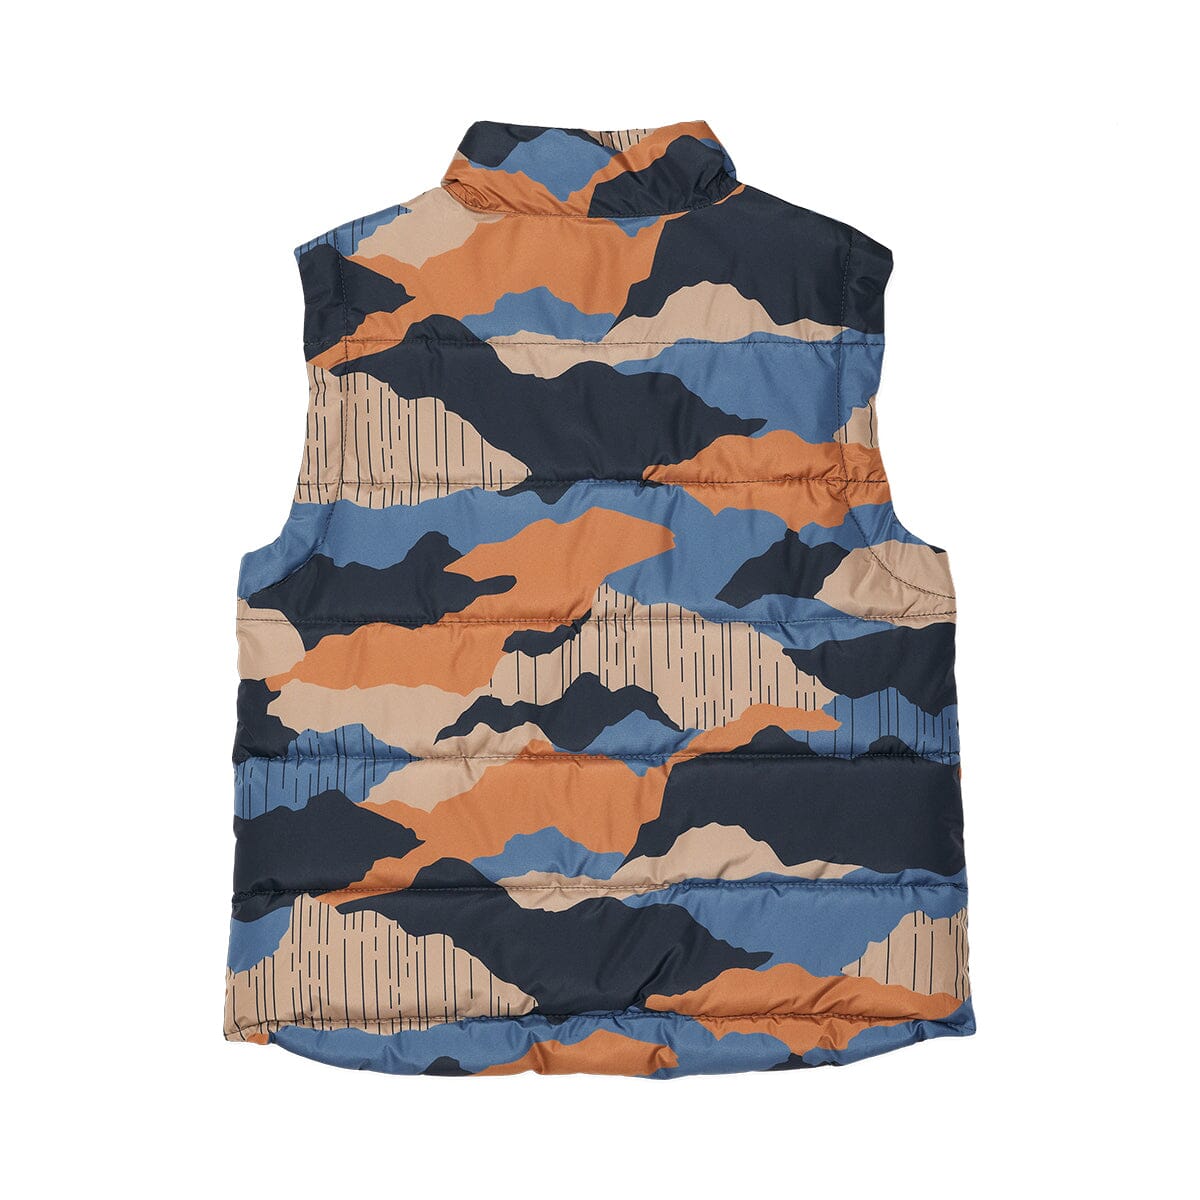 Crywolf | REVERSIBLE VEST - Camo Mountain *** PRE ORDER / DUE EARLY-MID APRIL *** Boys Crywolf